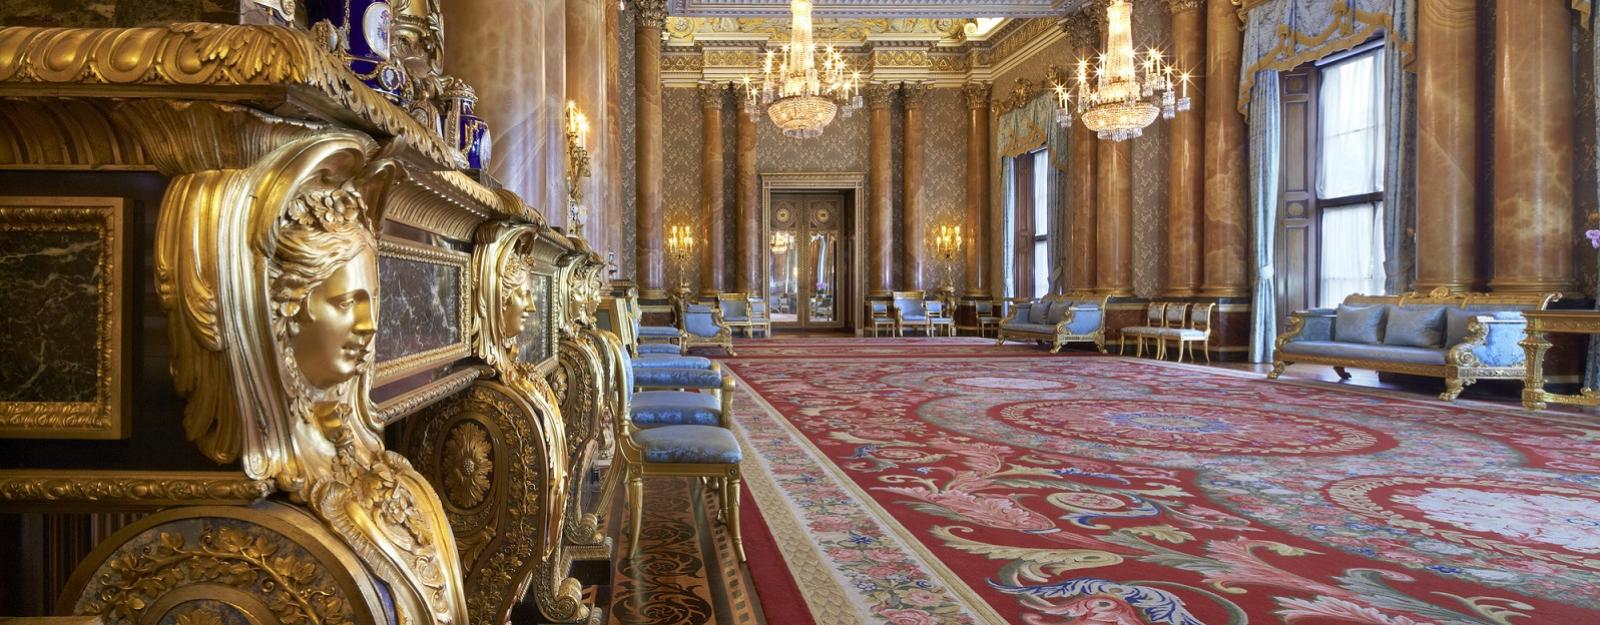 The Blue Drawing Room at Buckingham Palace